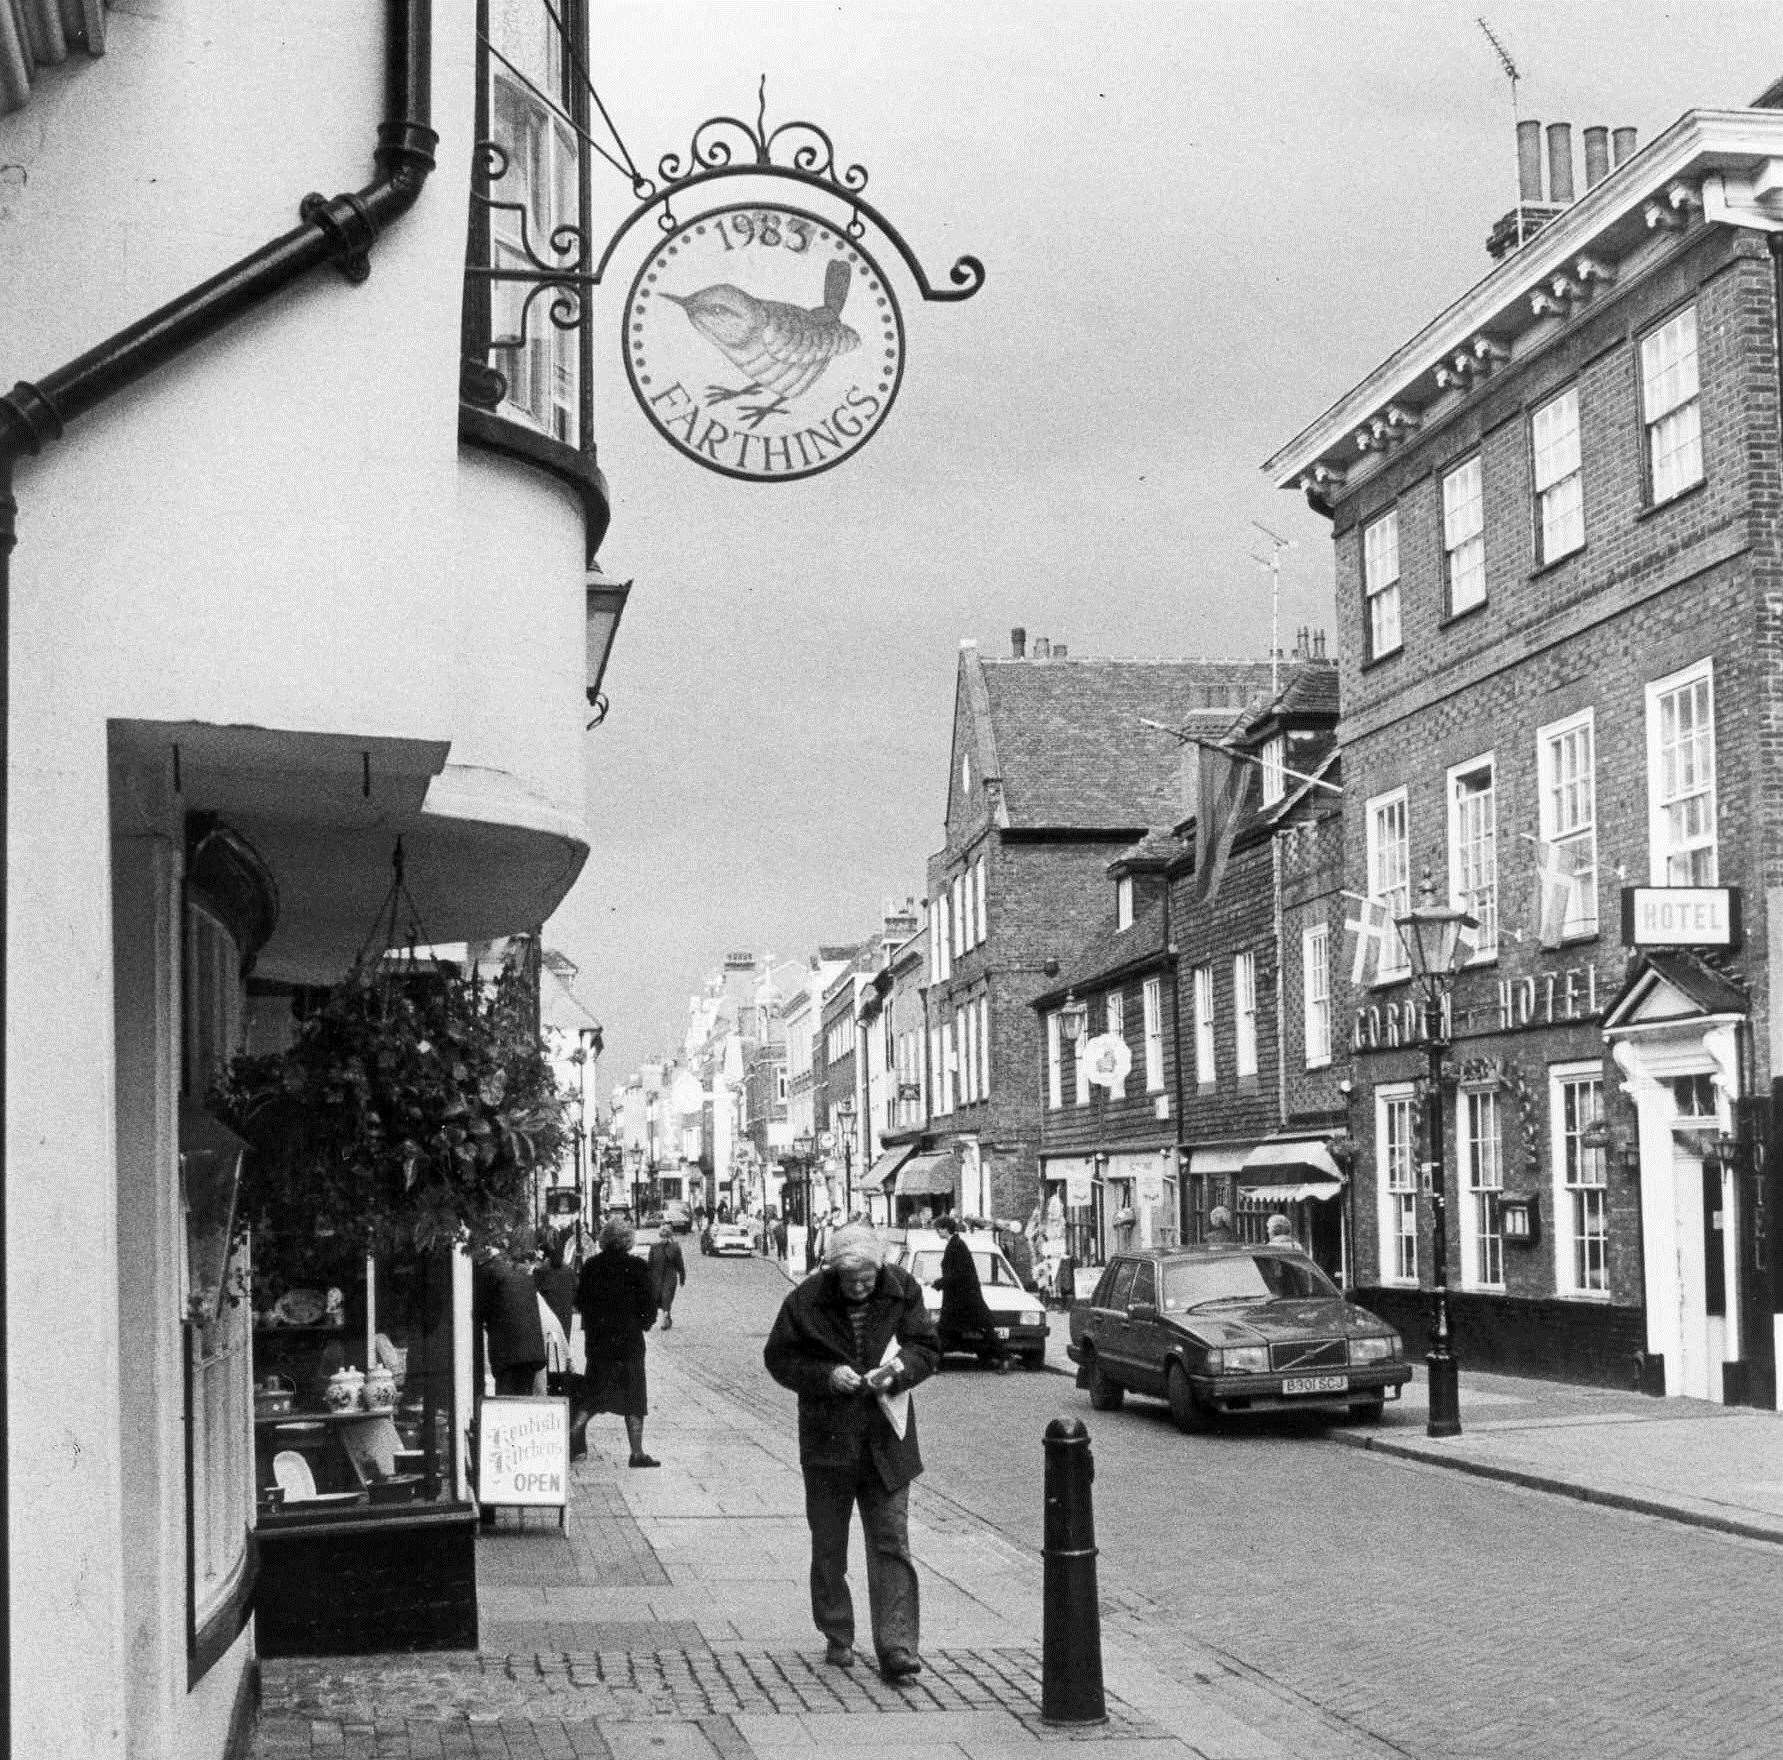 Rochester High Street in 1990 with the Gordon Hotel on the right of the photograph